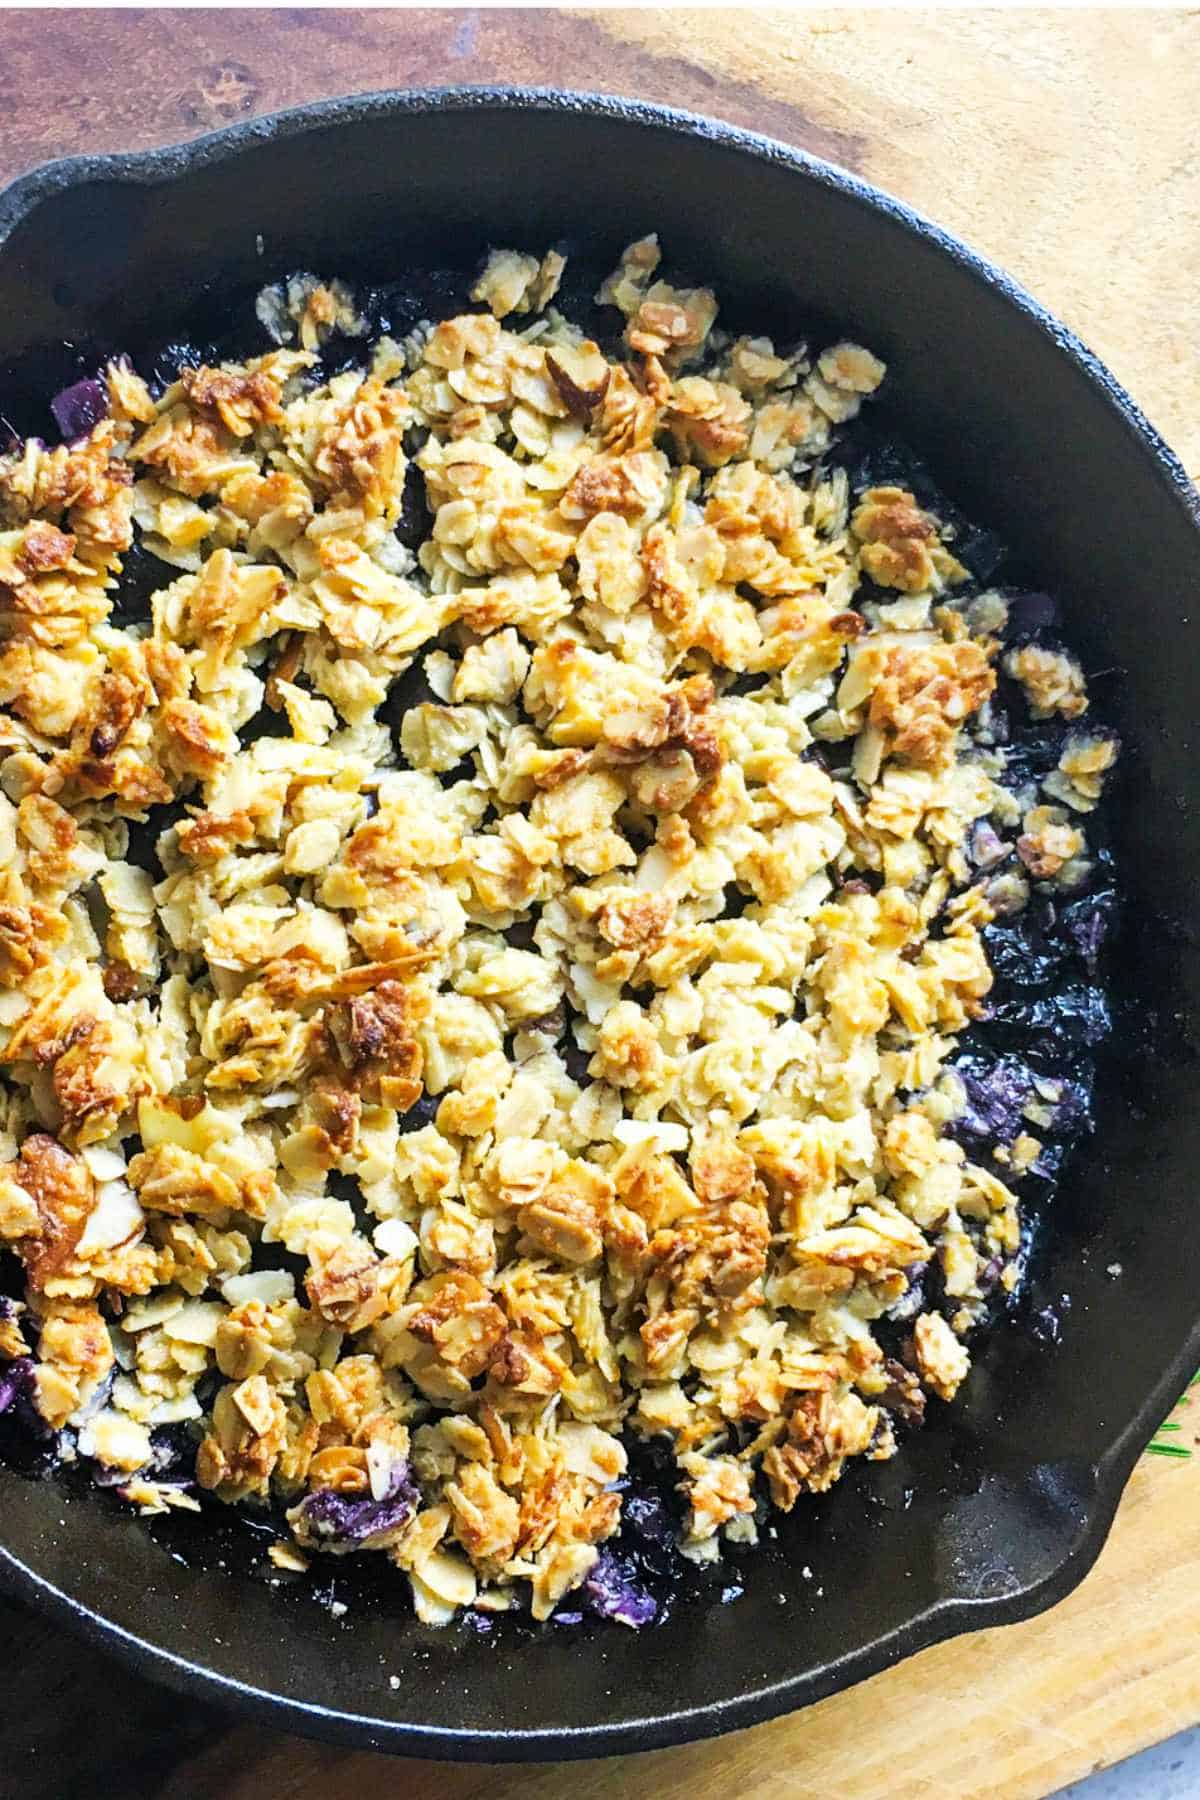 blueberry crisp from a cast iron skillet.